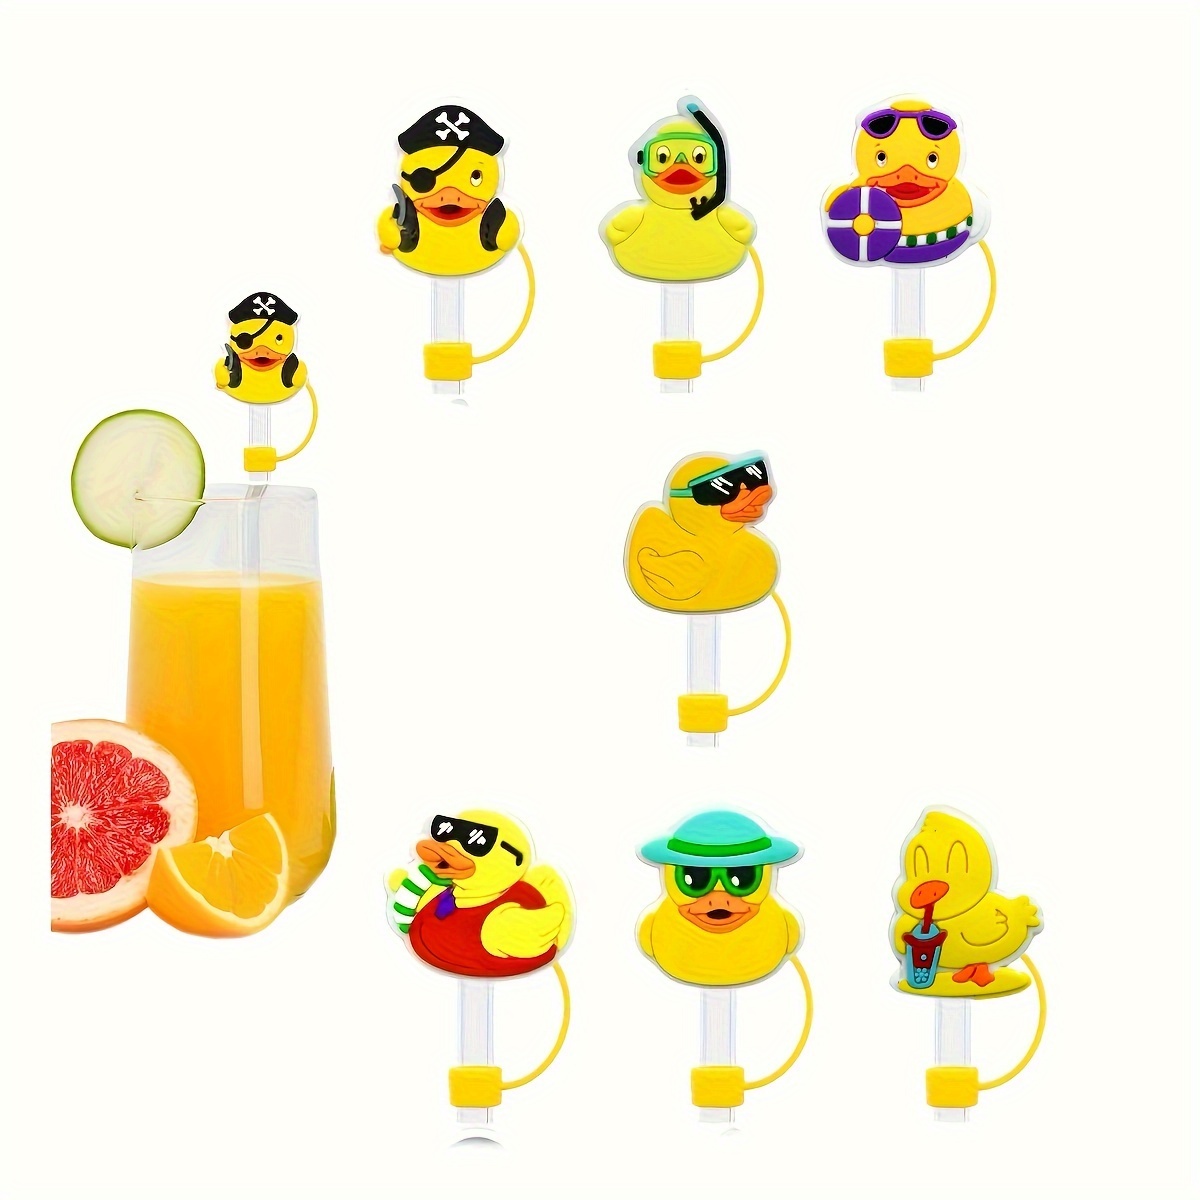 

10pcs Cute Duck Silicone Straw Tips Covers Charms For 10mm Straws, Reusable Beverage Splash-proof Drinking Straw Plugs For Cup Straw Tops, Assorted Duck Designs - Fits Standard Straws